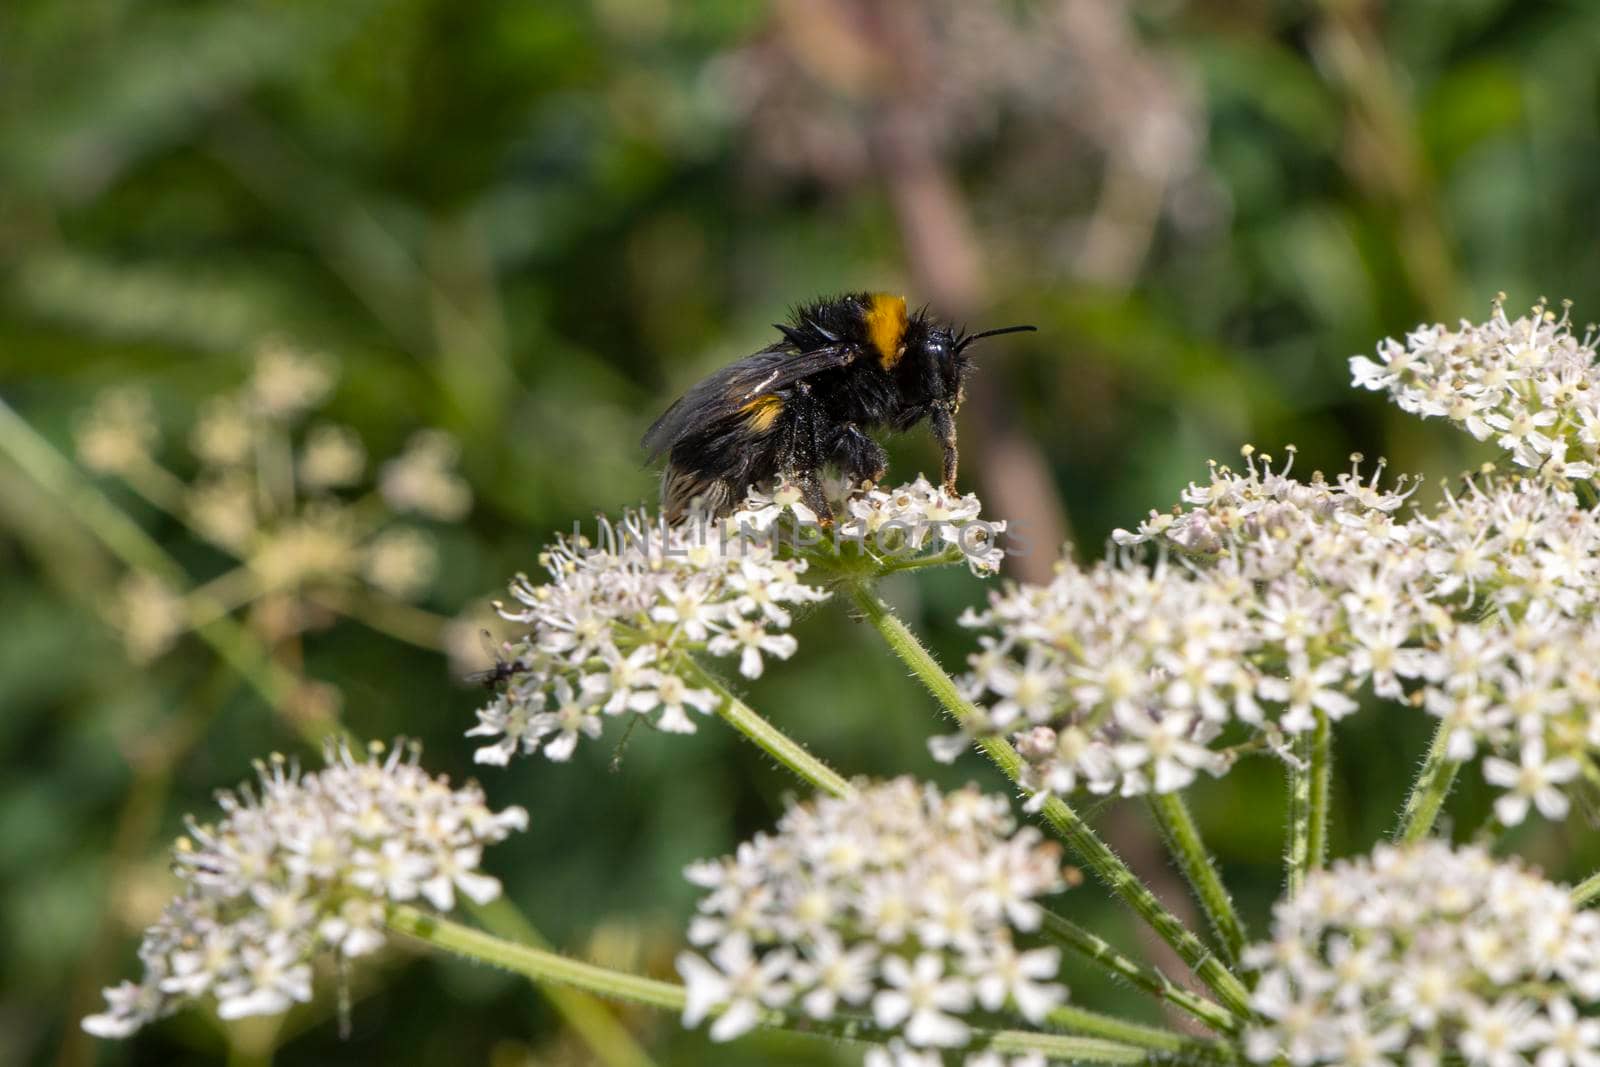 Macro photo of bombus locurum, fluffy yellow and black bee with wings, antennae visible, standing on white yarrow flowers. Shot on a summer's day in Norfolk, England, UK. Canon EOS 90D